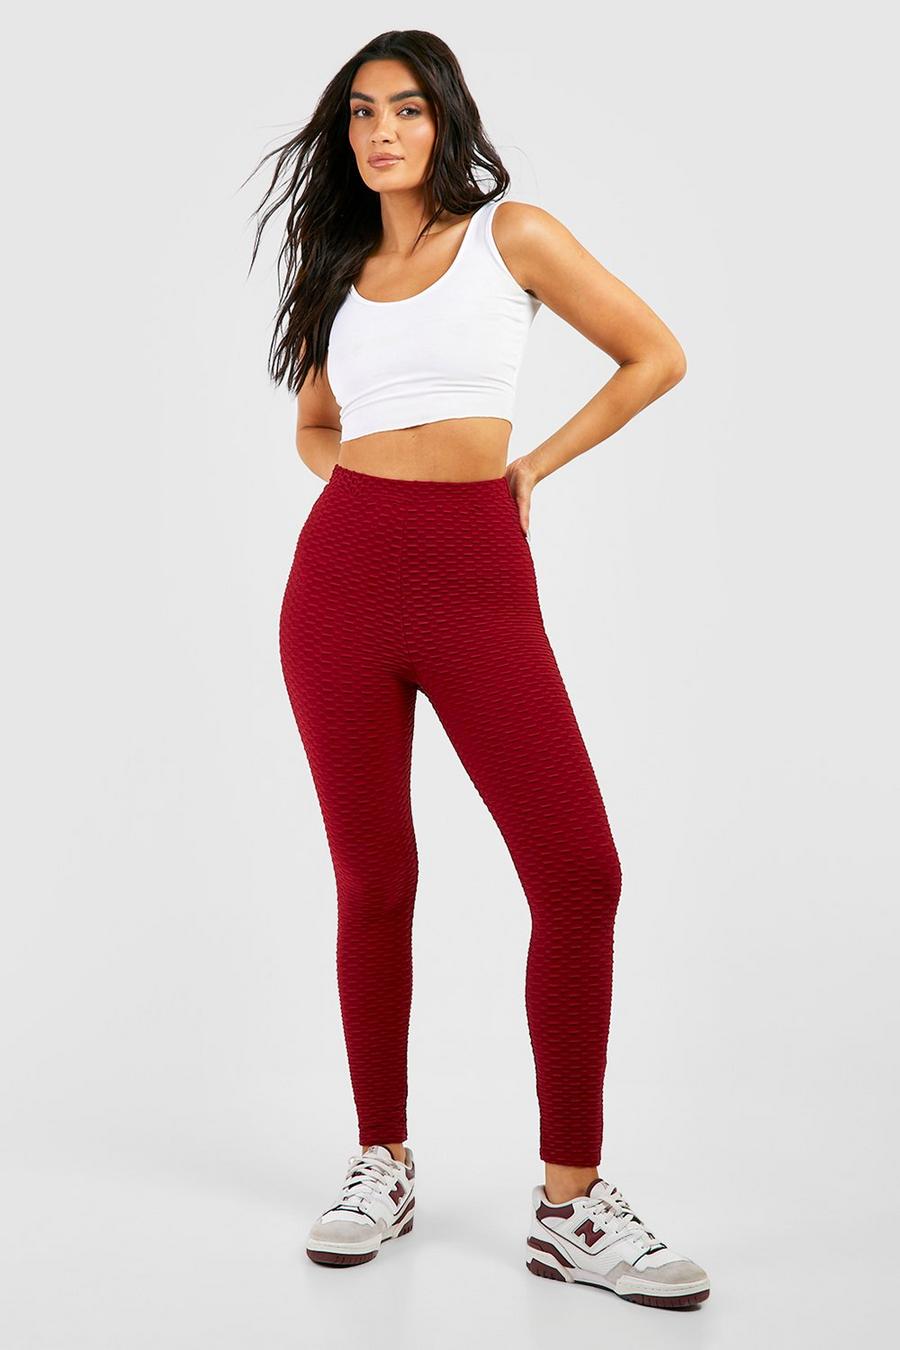 How to Wear Burgundy/Maroon Leggings All through the Year